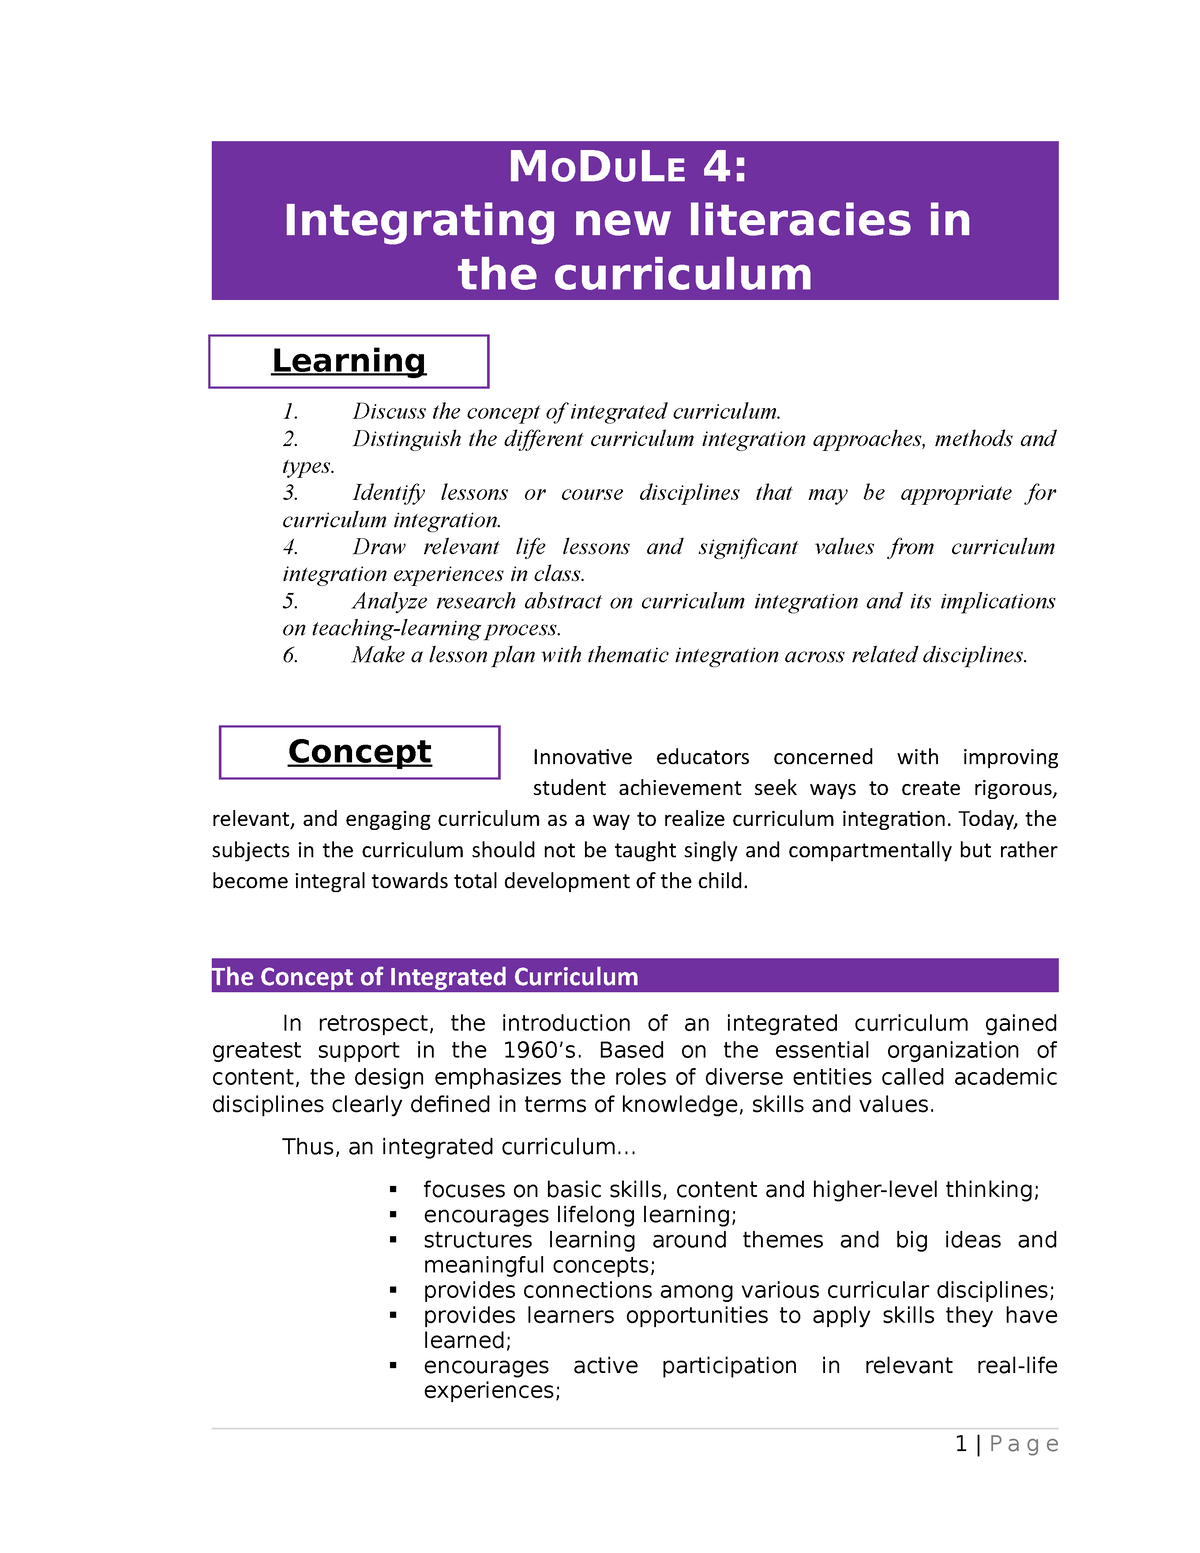 integrating new literacies in the curriculum essay